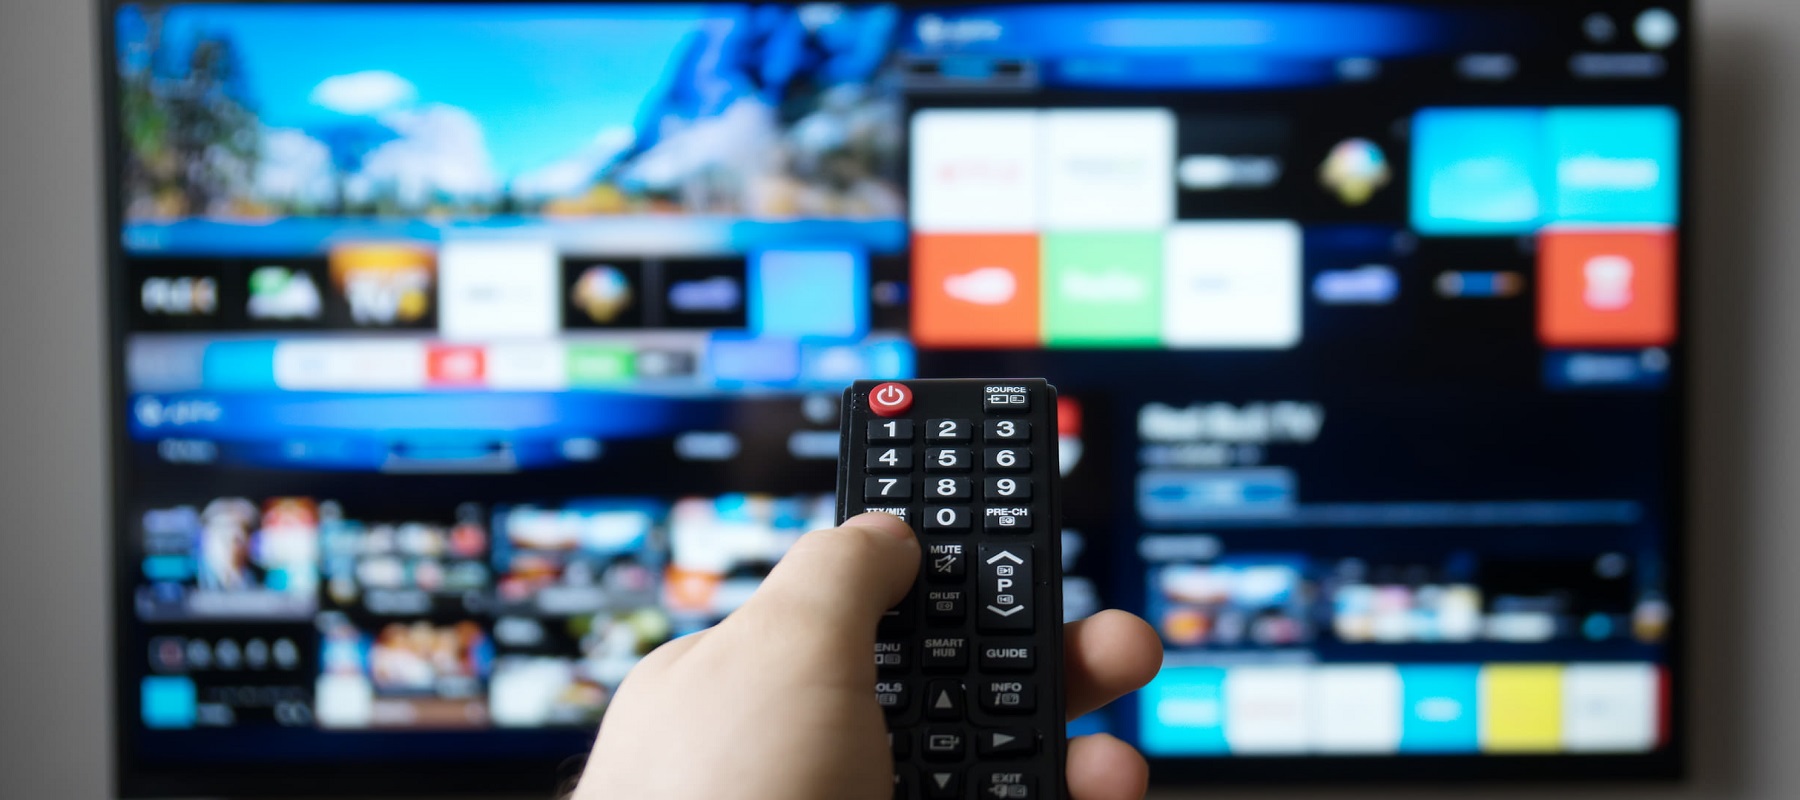 Connected TV accounts for half of global video impression share for retail advertisers, report